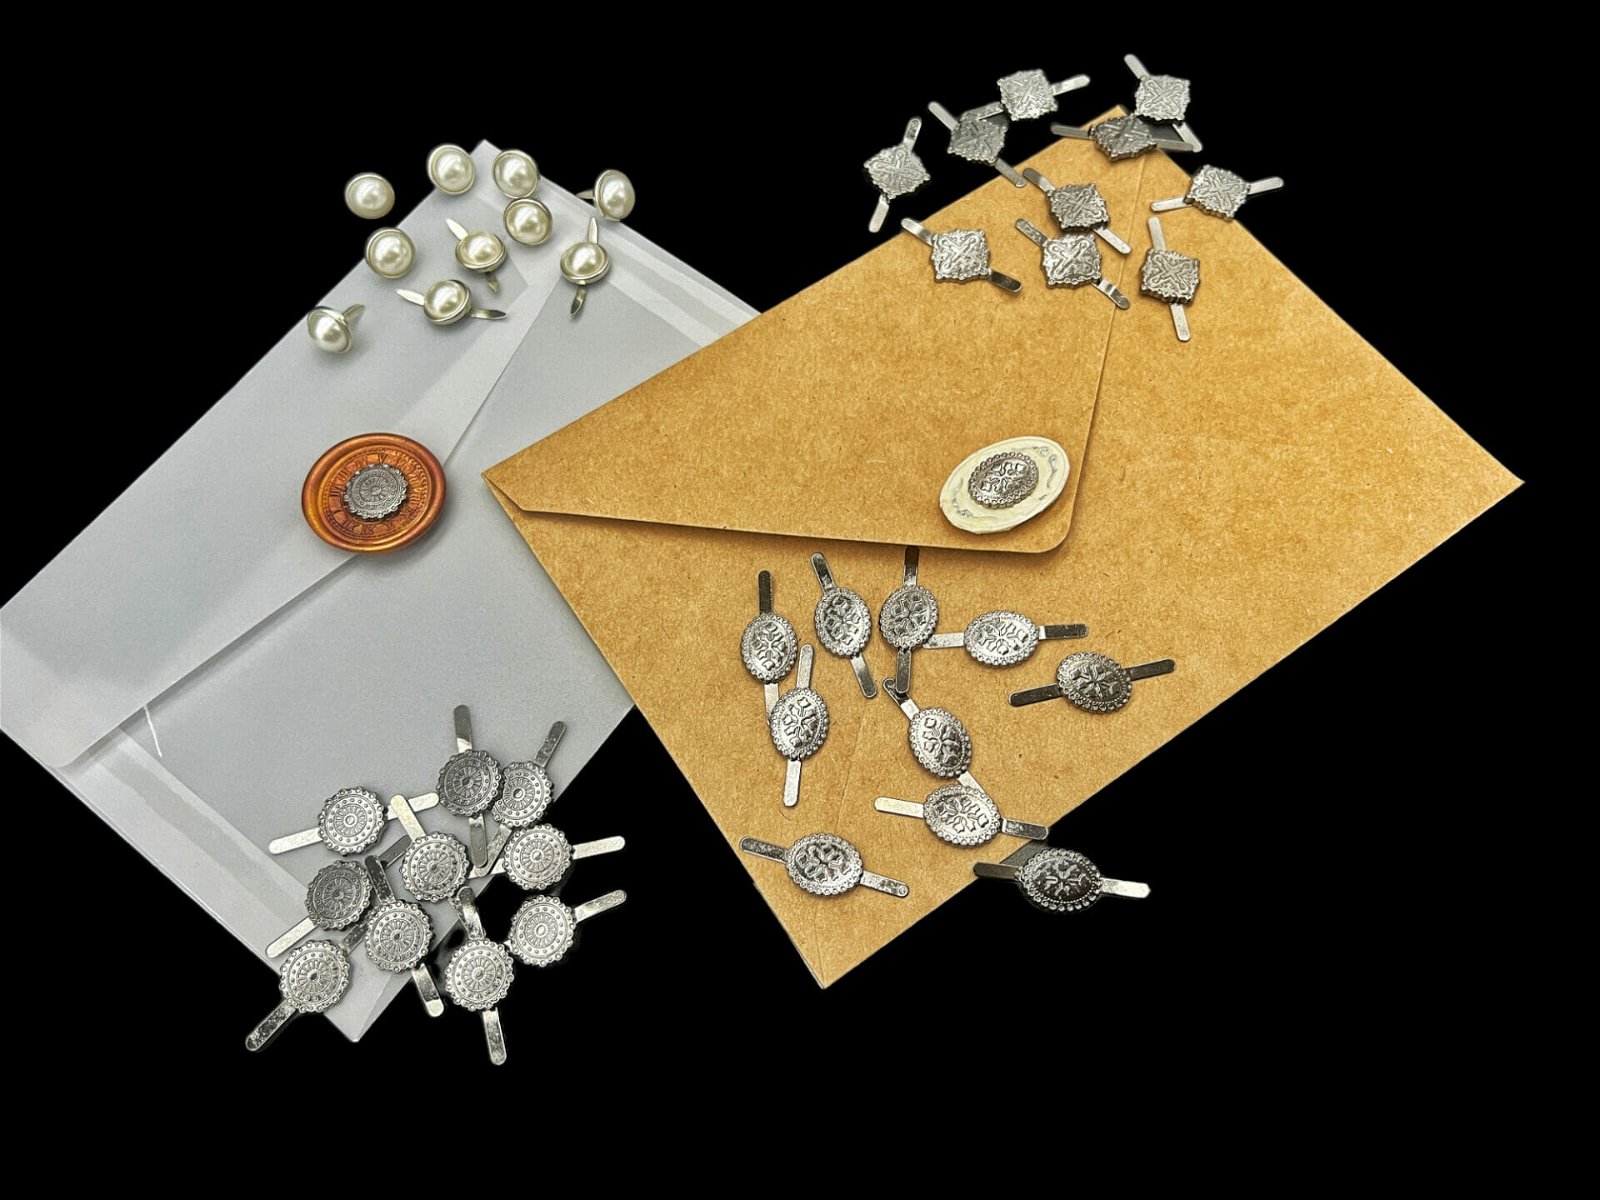 Decorative Brads Metal and Pearls for crafting projects